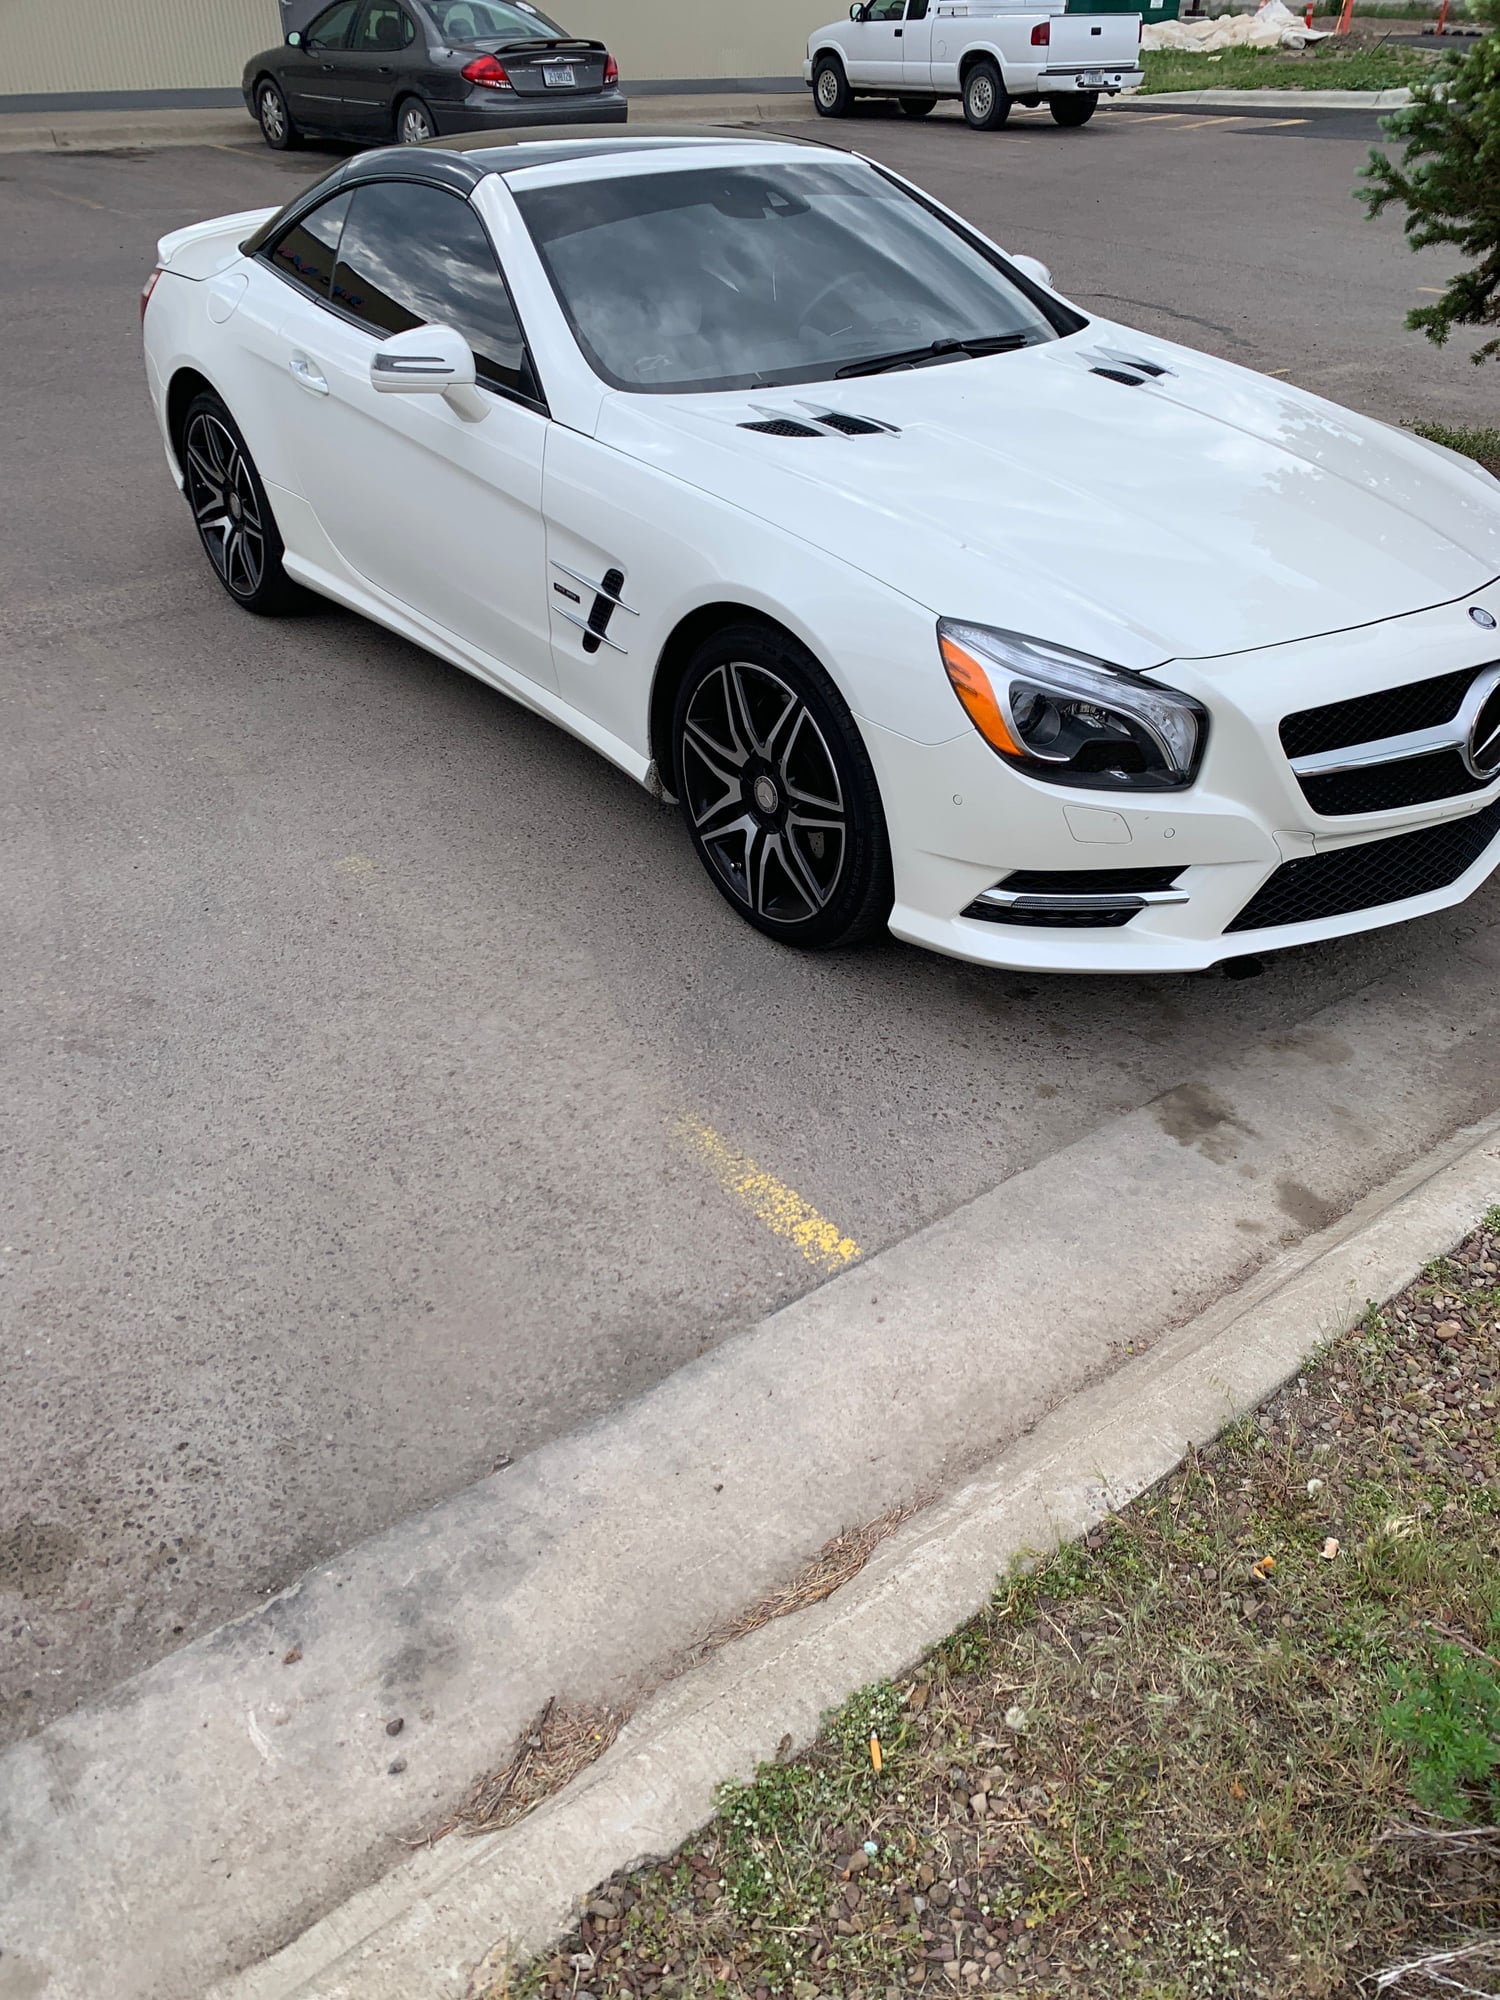 Wheels and Tires/Axles - 2015 SL 550 WHITE ARROW WHEELS 6K MILES - Used - 2015 Mercedes-Benz SL550 - Great Falls, MT 59401, United States